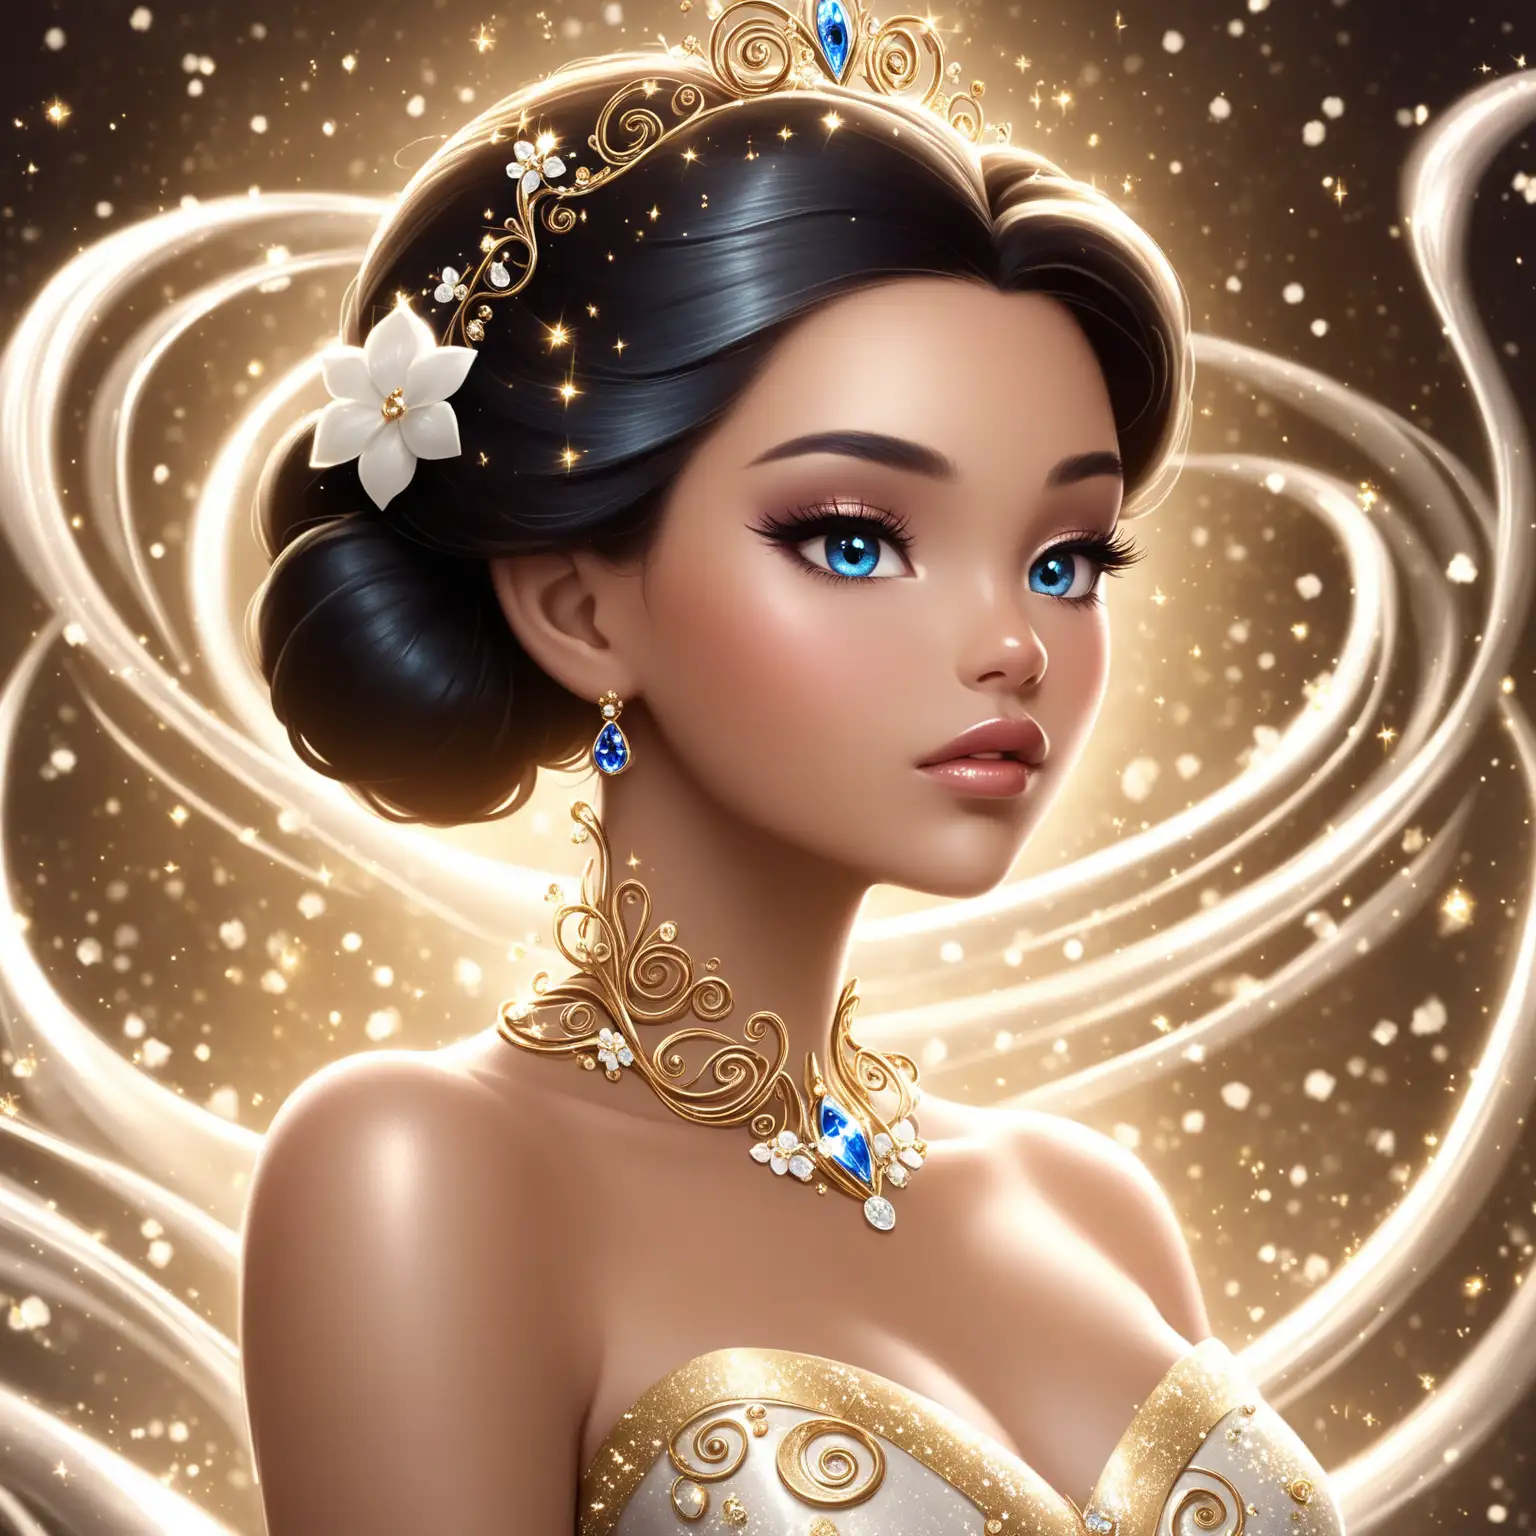 Beautiful Disney princess, full lips, long hair up in a sleek bun, princess gown, jewelry, glossy makeup, white flowers, magic swirls, gold sparks, cinched waist, close up